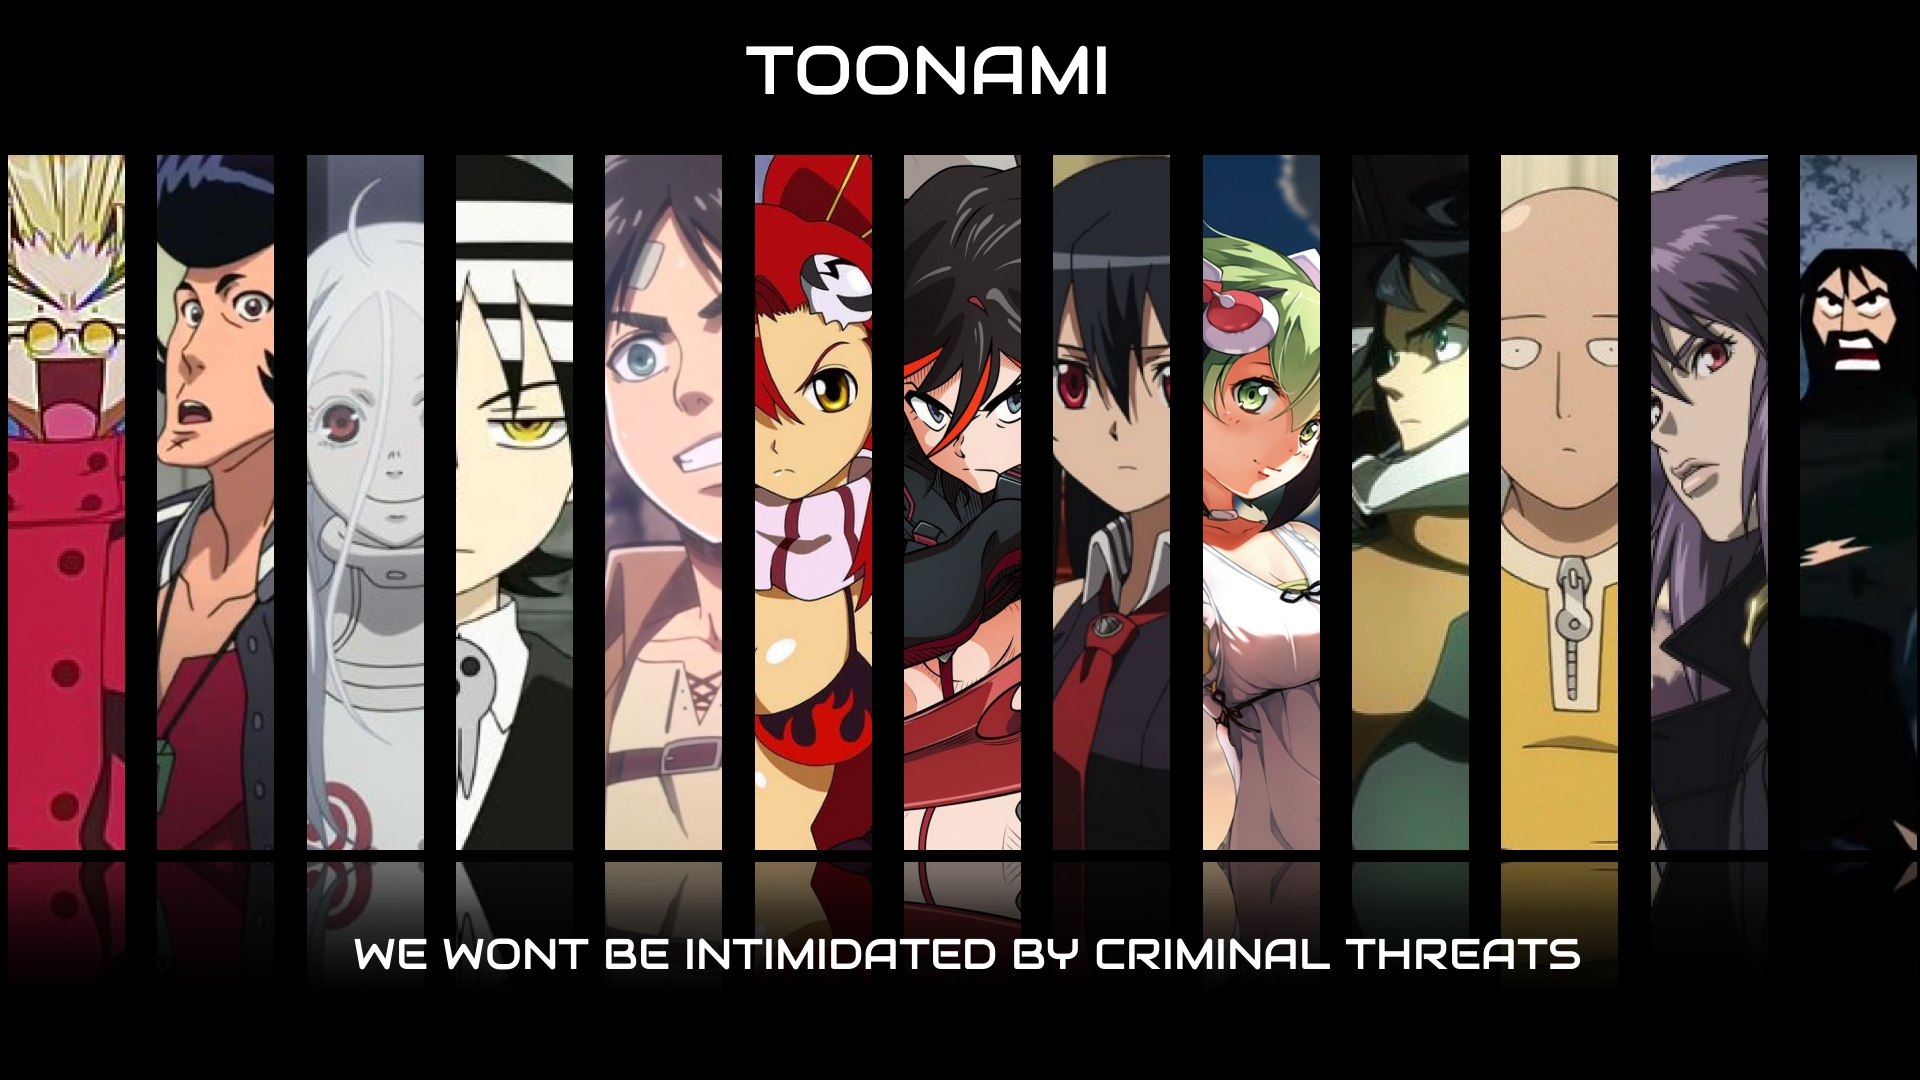 1920x1080 A few days late, but did another medley wallpaper for New Toonami's 5 Year Anniversary! Album on Imgur